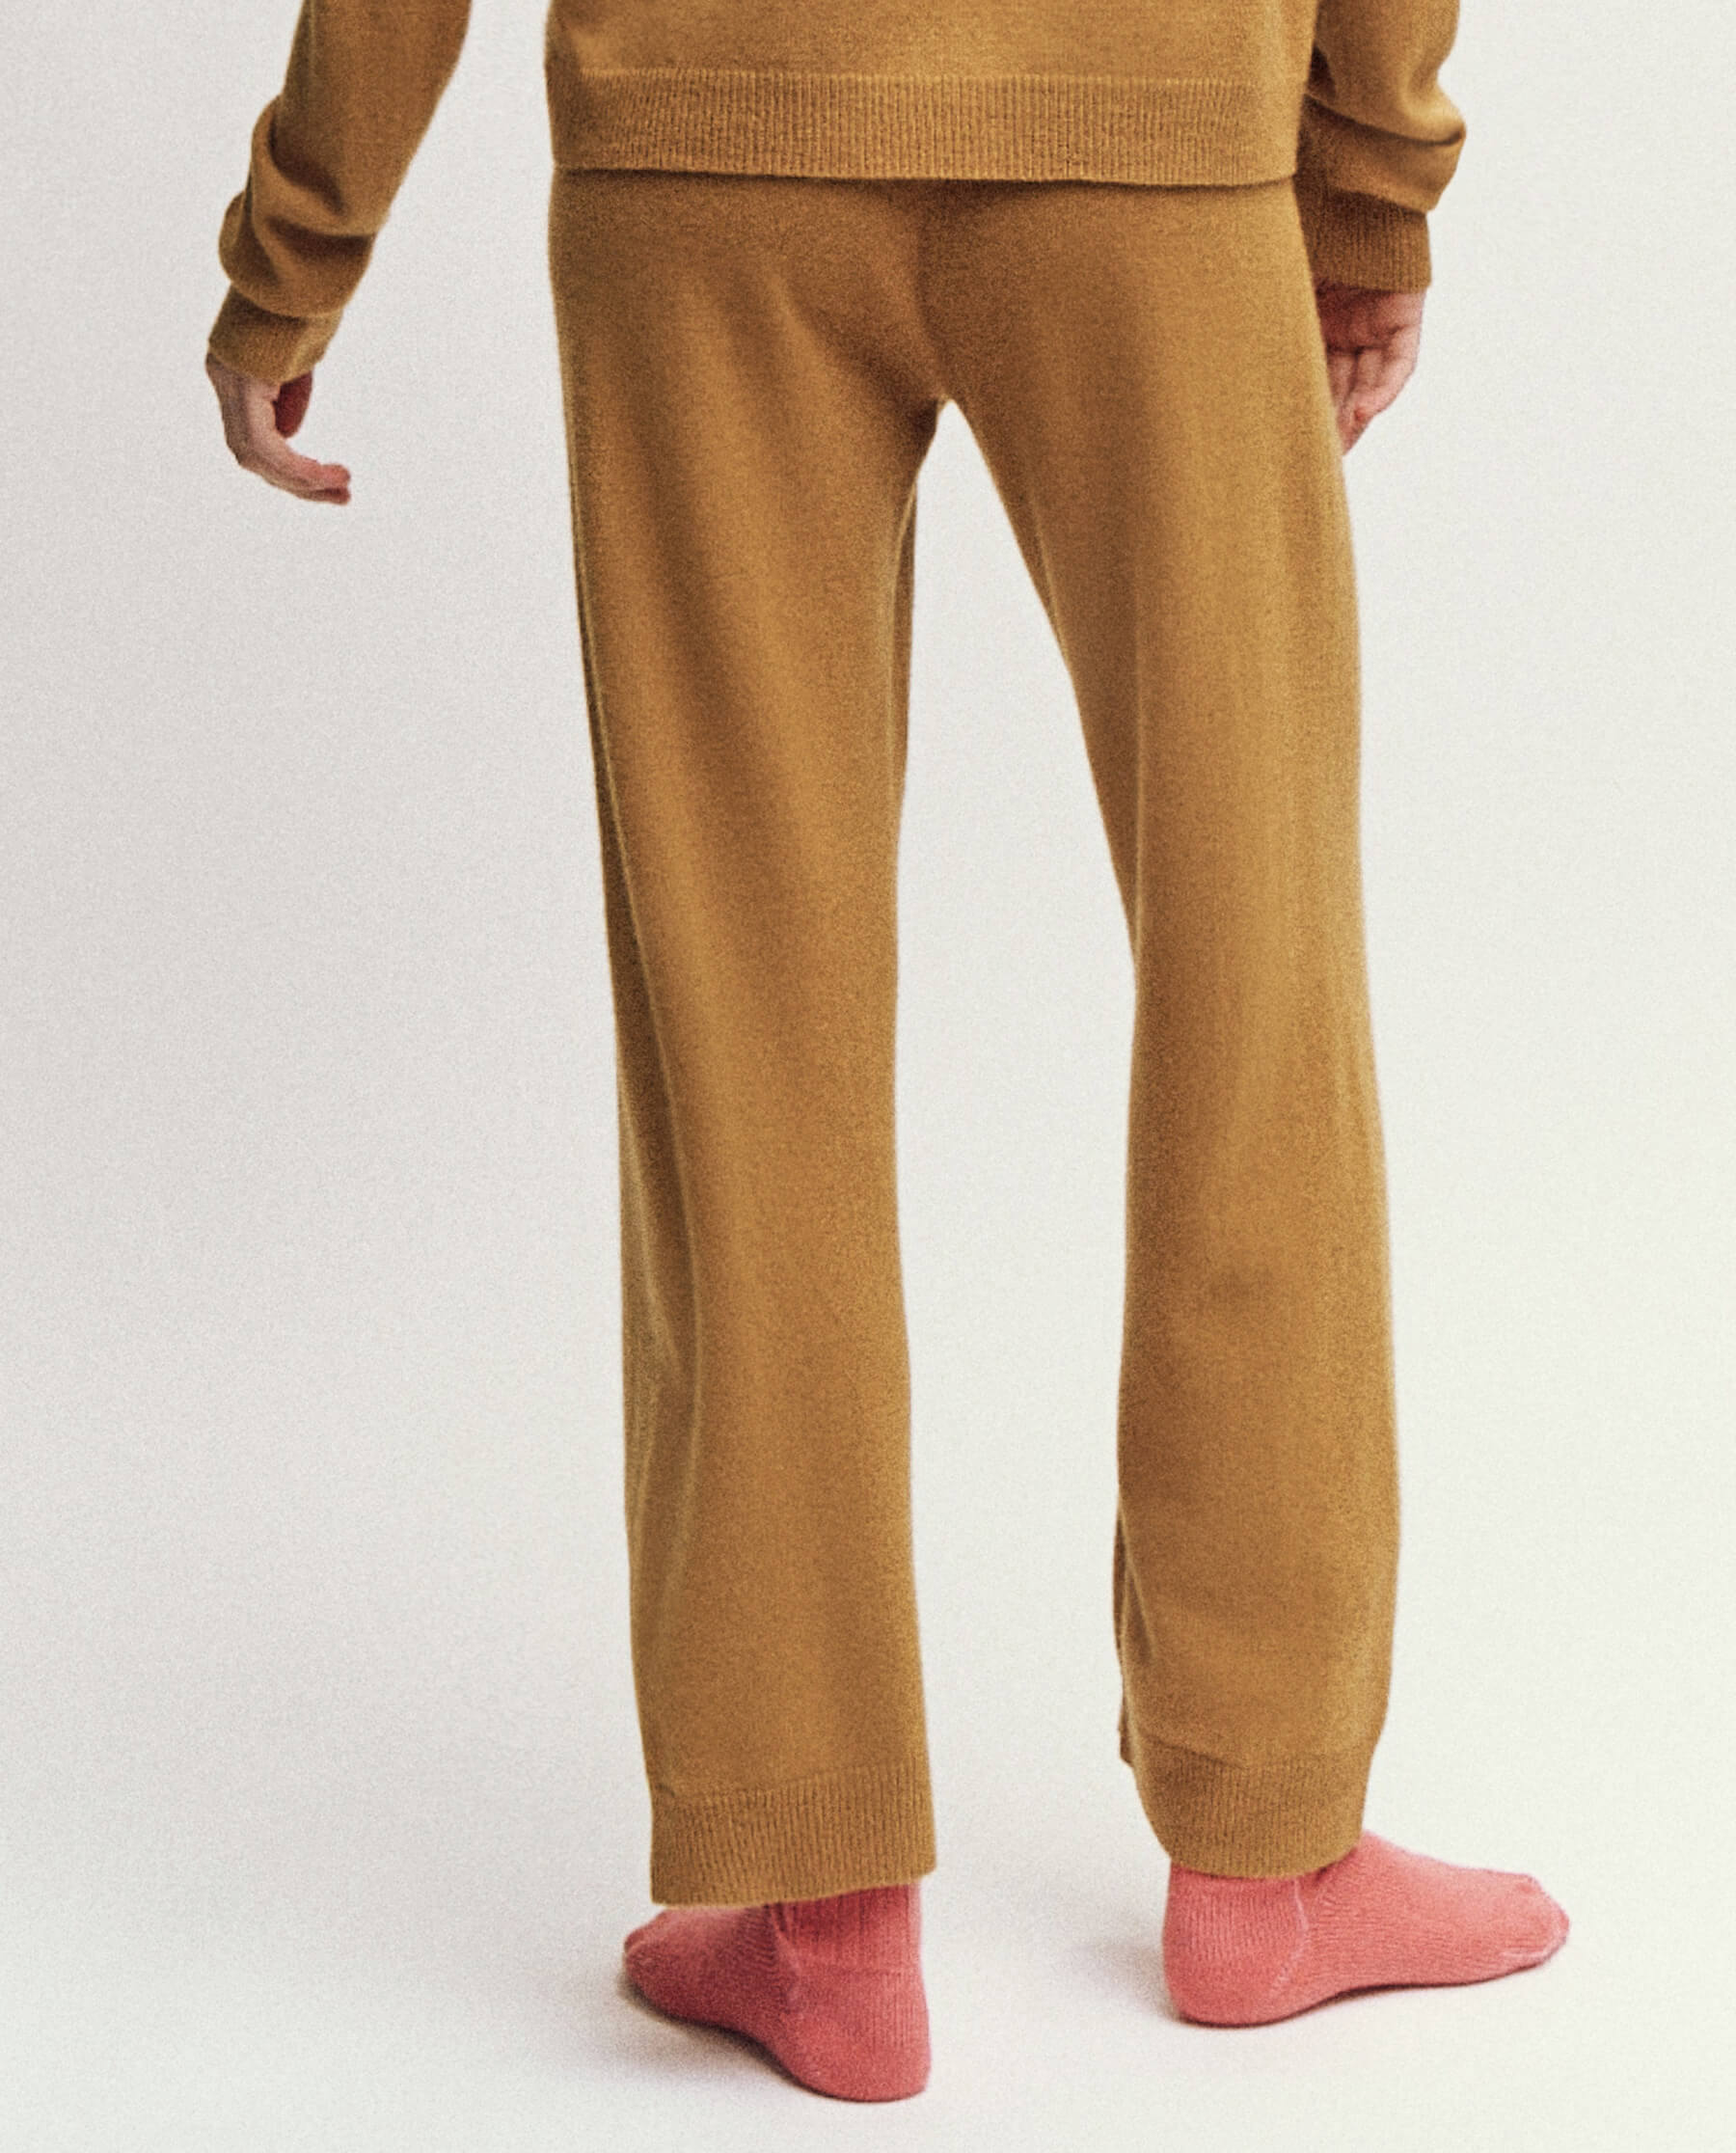 The Lantern Pant. -- Marigold BOTTOMS THE GREAT. HOL 22 D2 CASHMERE